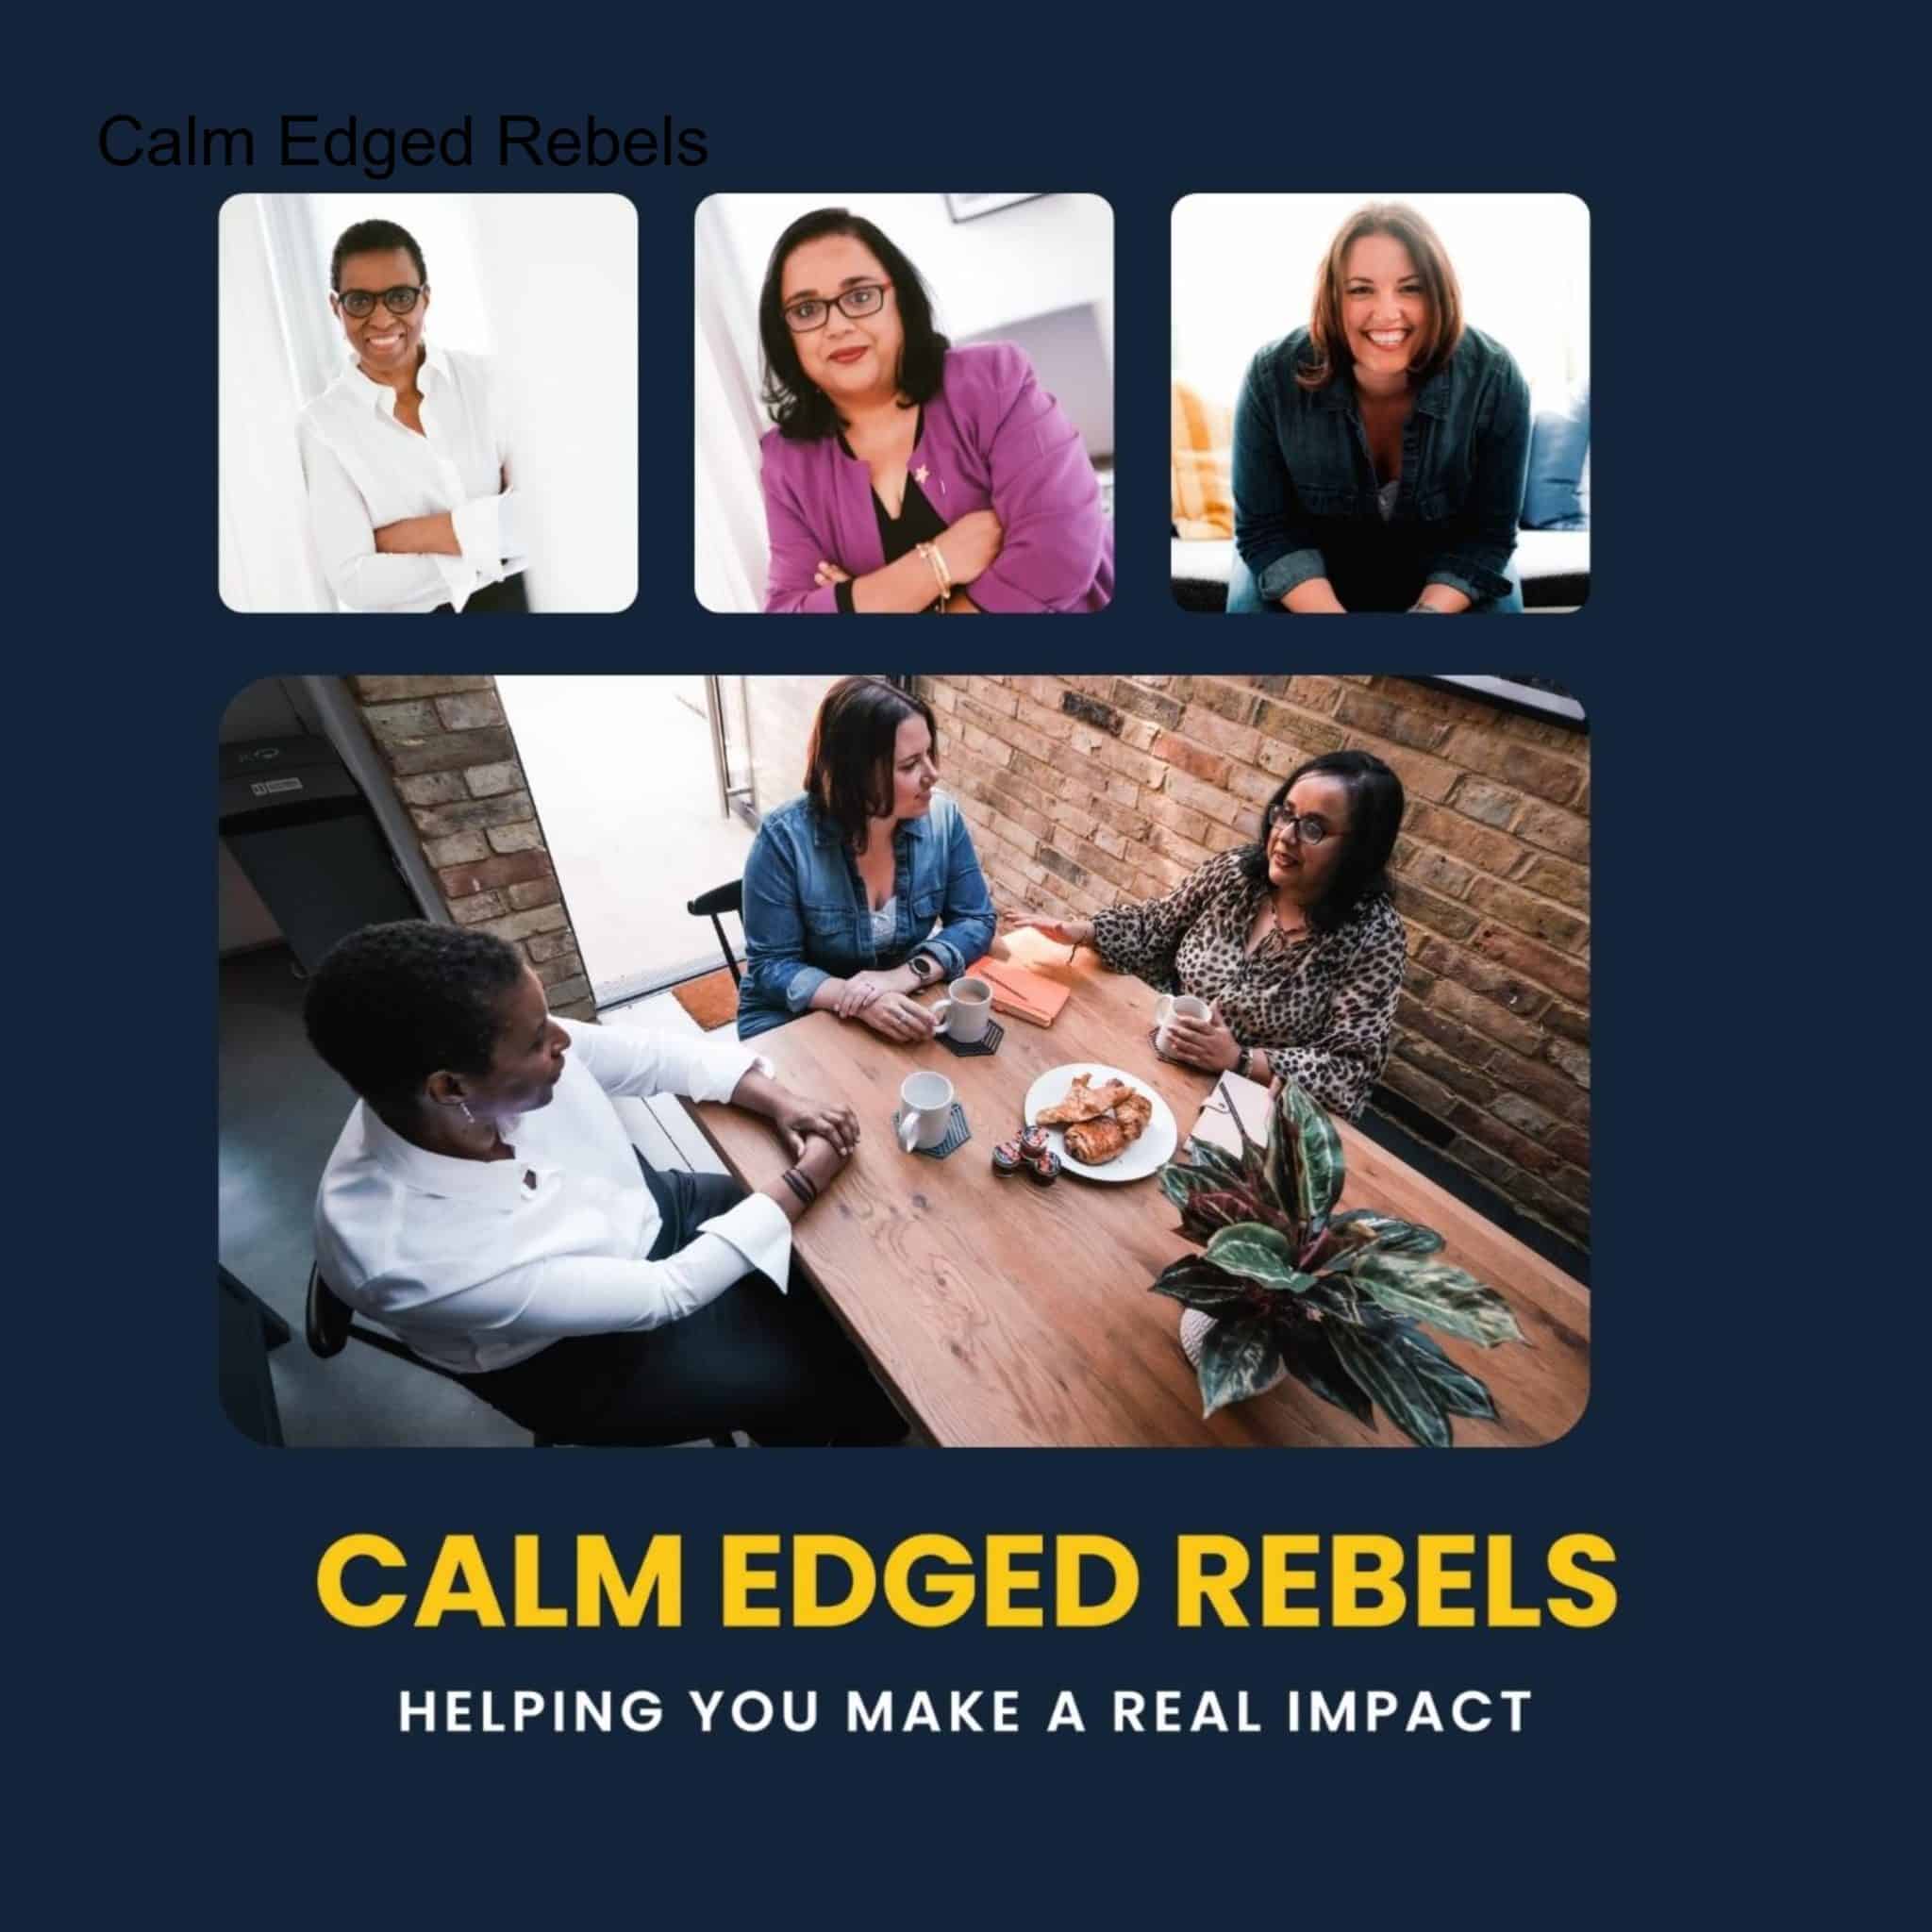 Image for the Calm Edged Rebels podcast